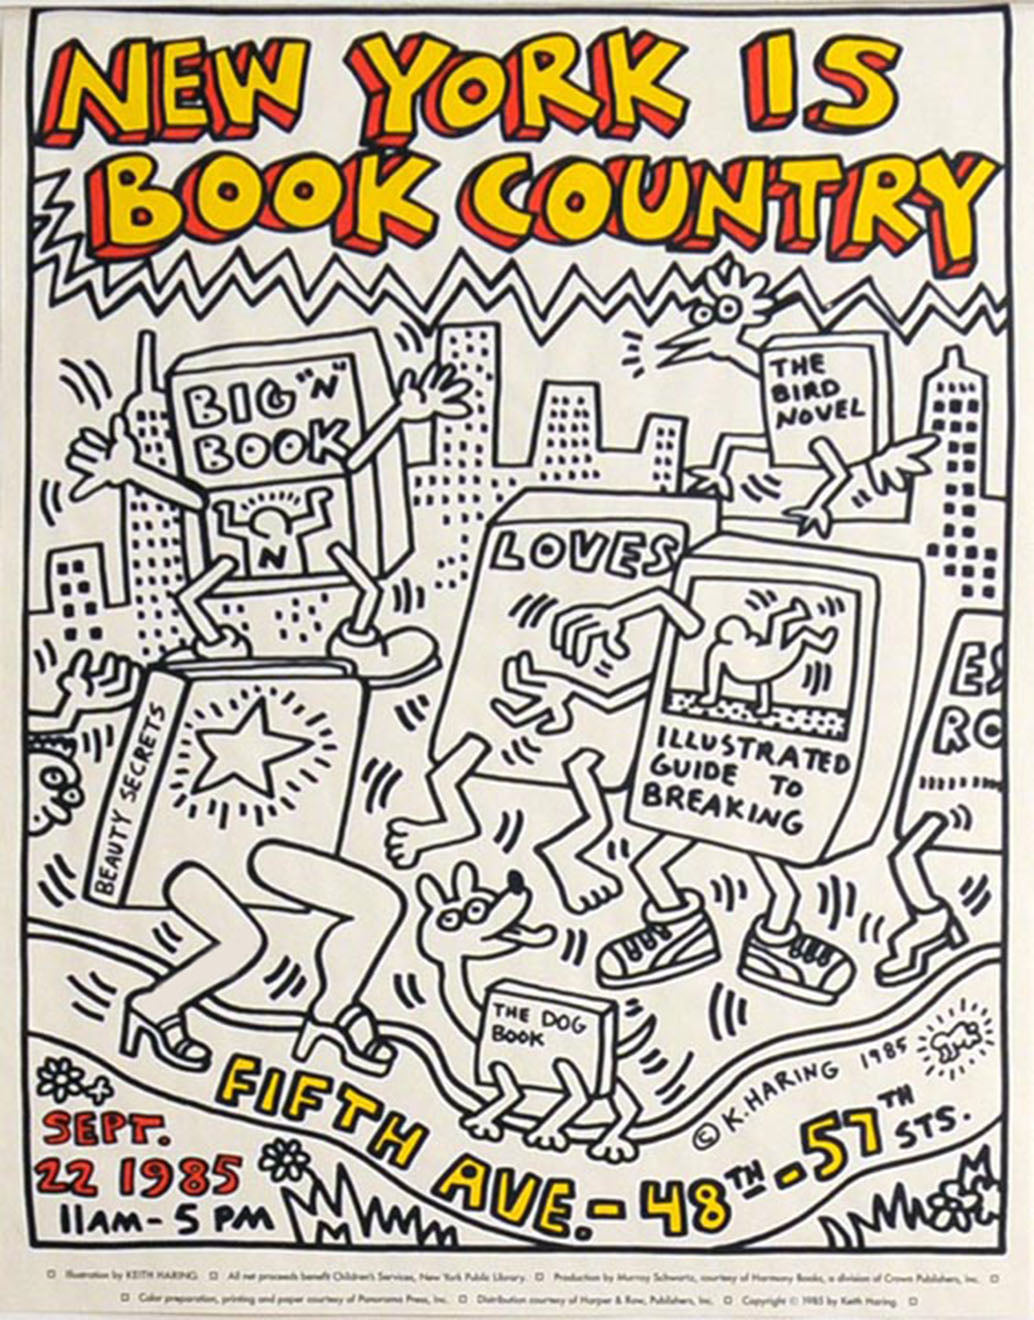 ABOUT EDWARD KURSTAK NEW YORK IS BOOK COUNTRY POSTER by Keith Haring